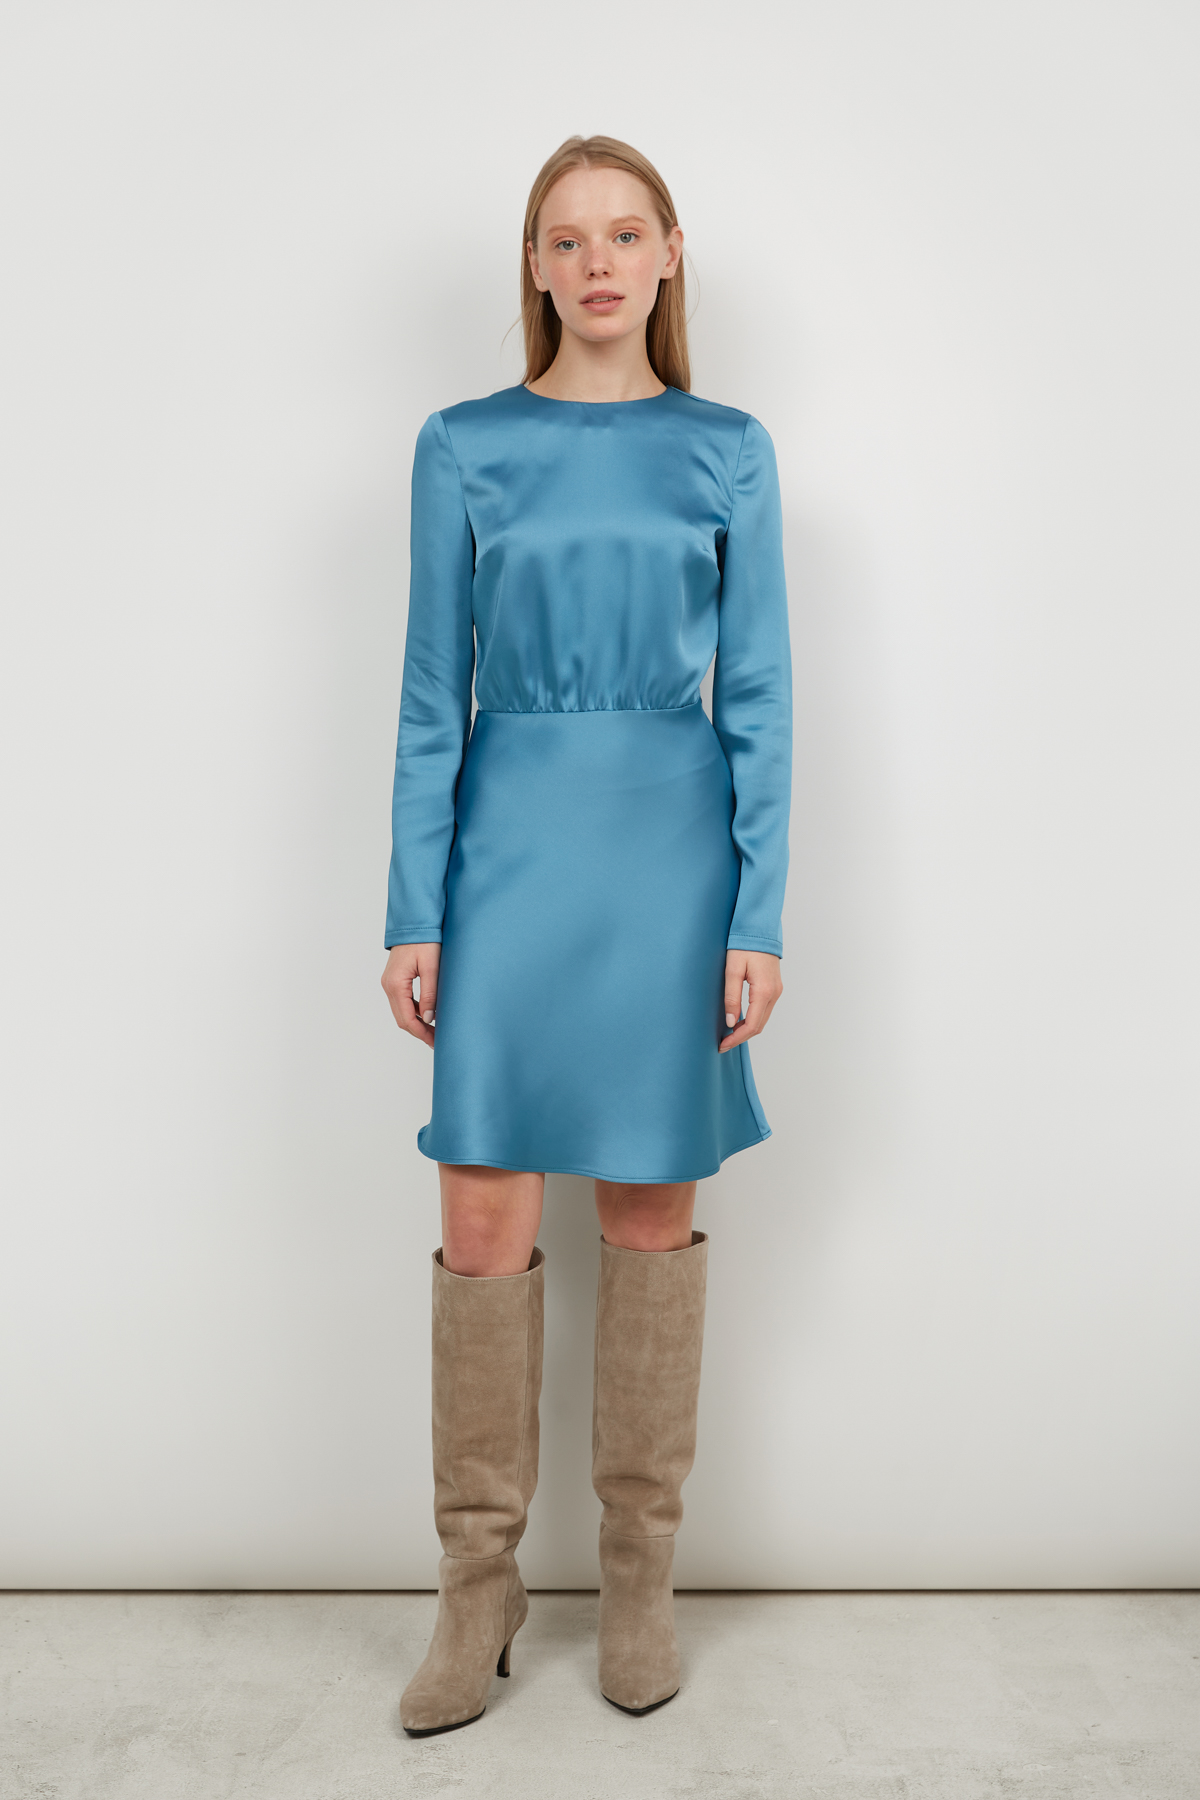 Short blue dress in satin with long sleeves, photo 2